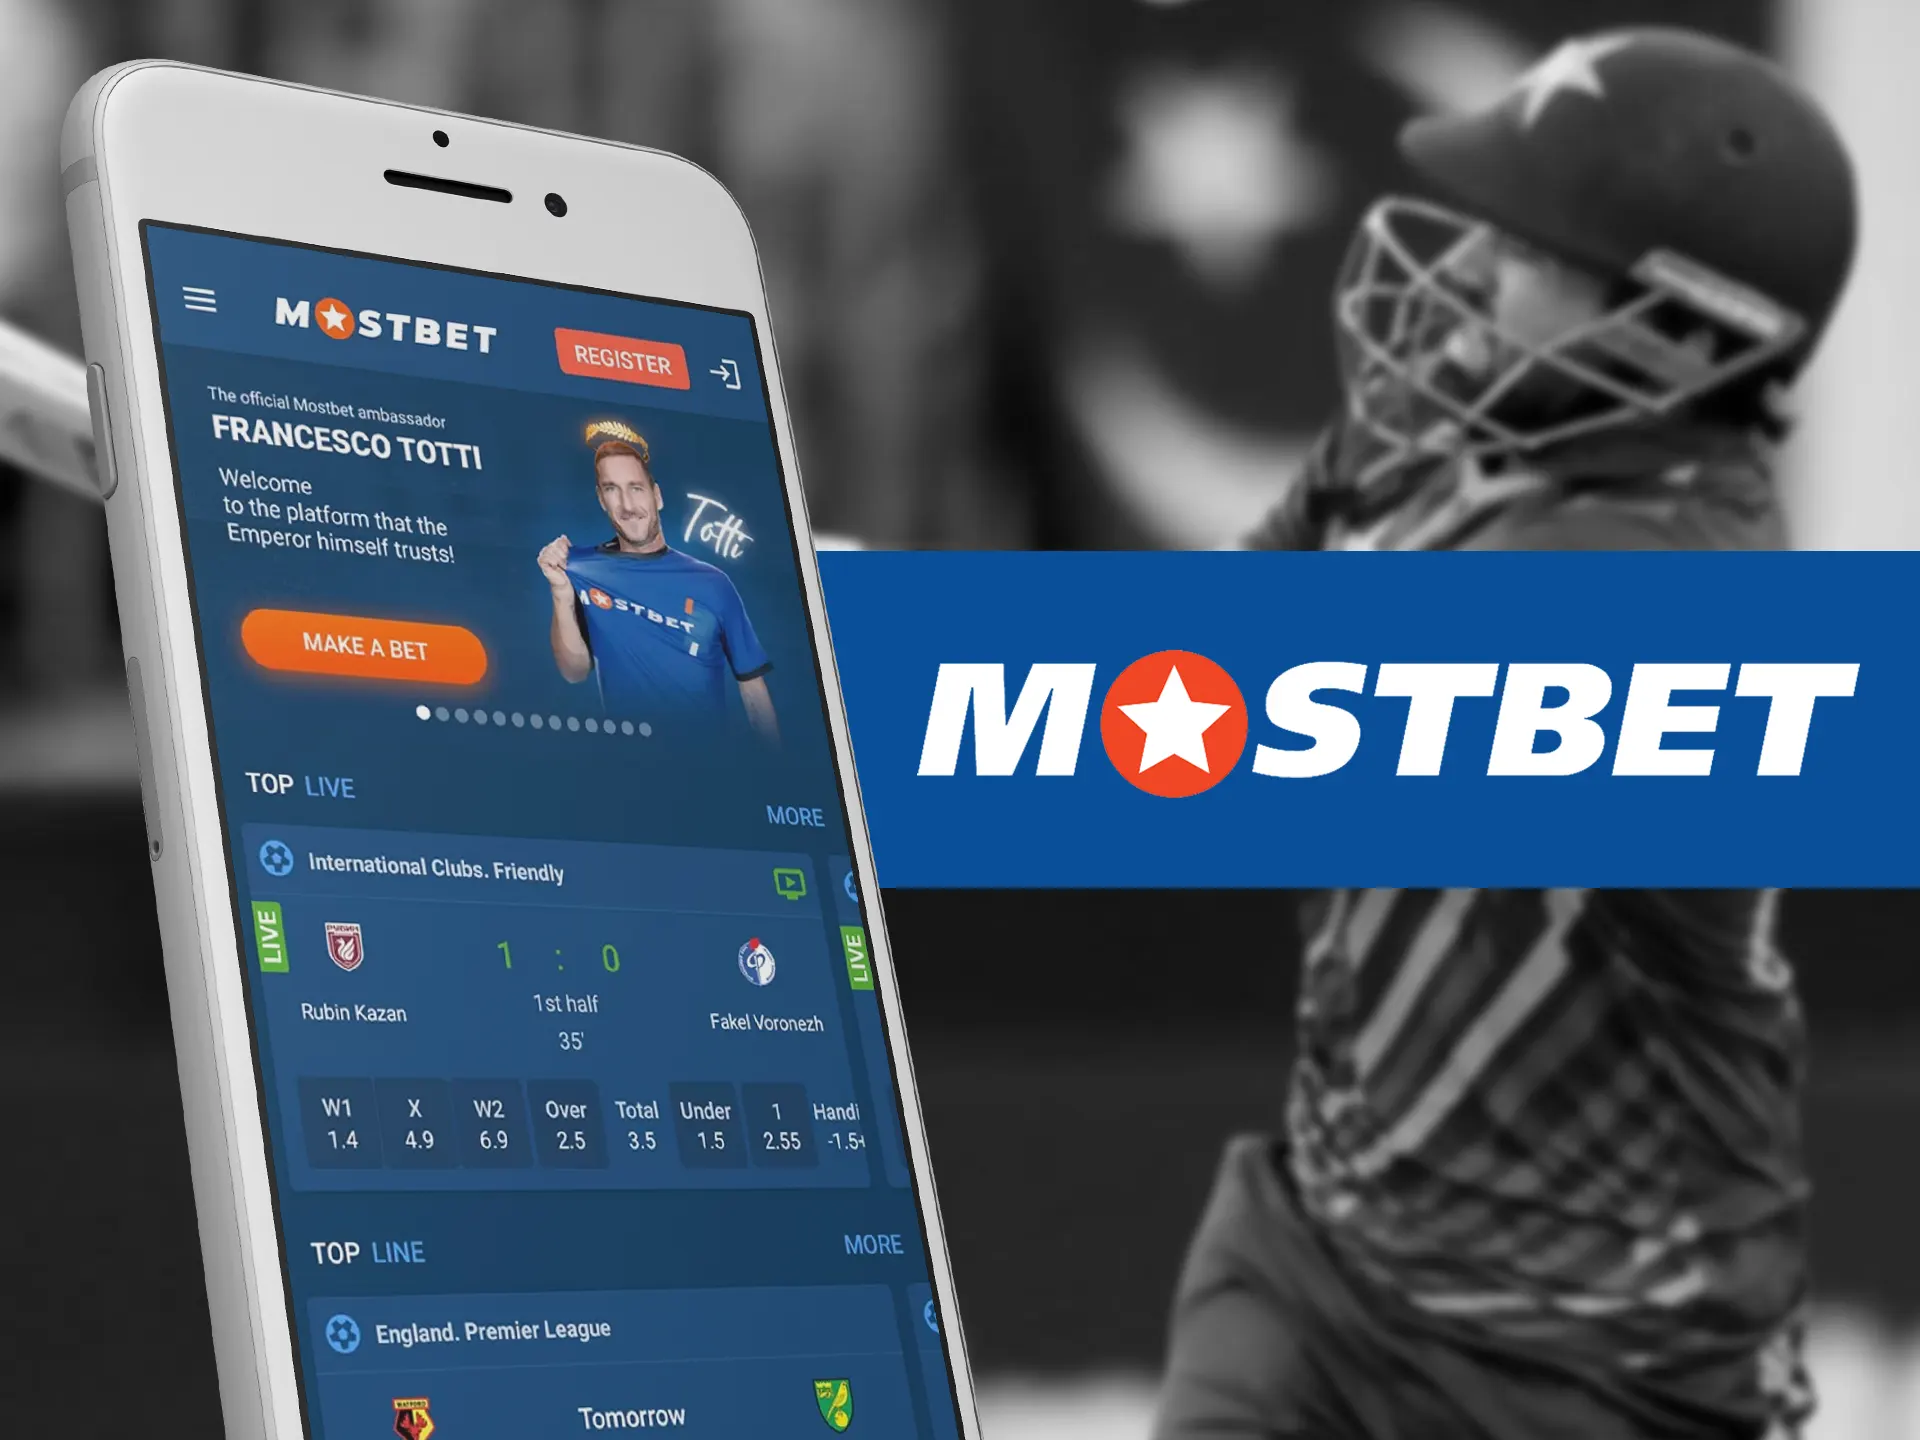 Get all of the Mostbet promotions in app.